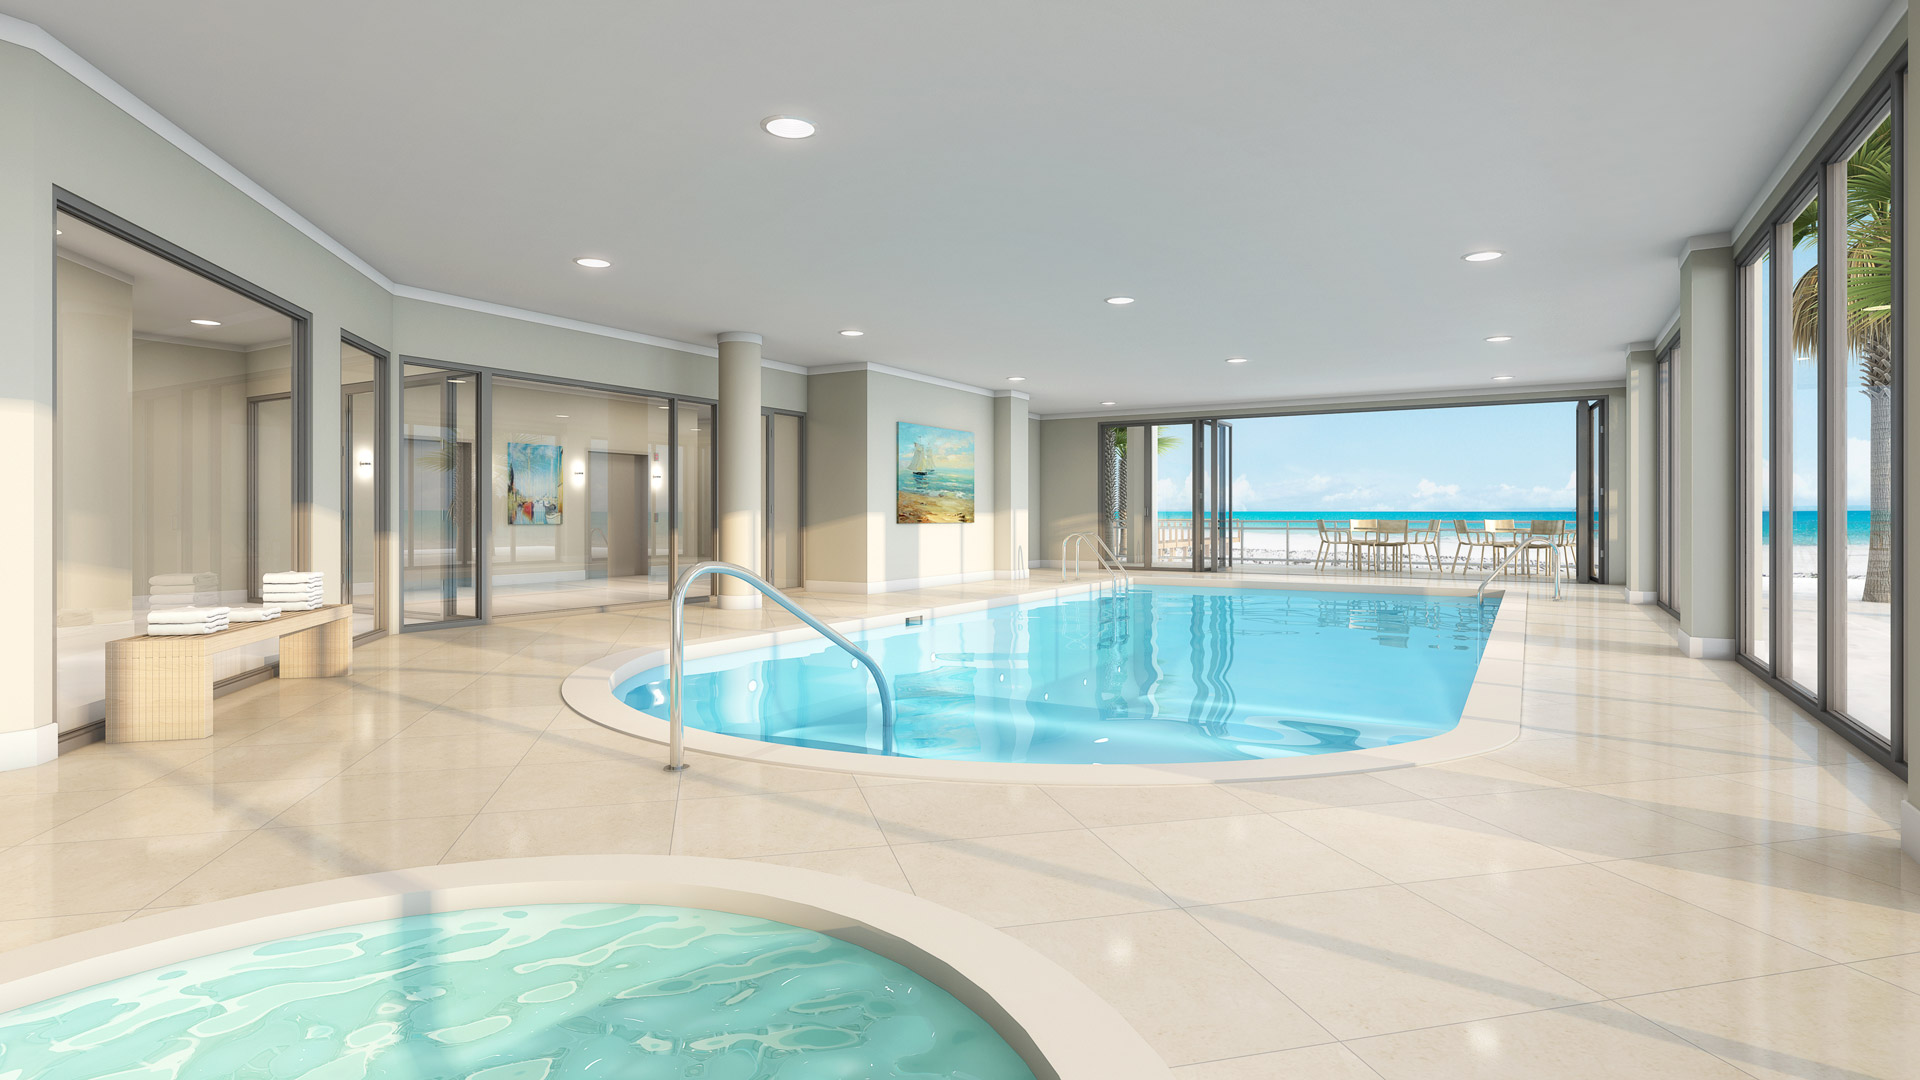 3d rendering of the ground floor indoor pool and hot tub overlooking the beach and ocean.